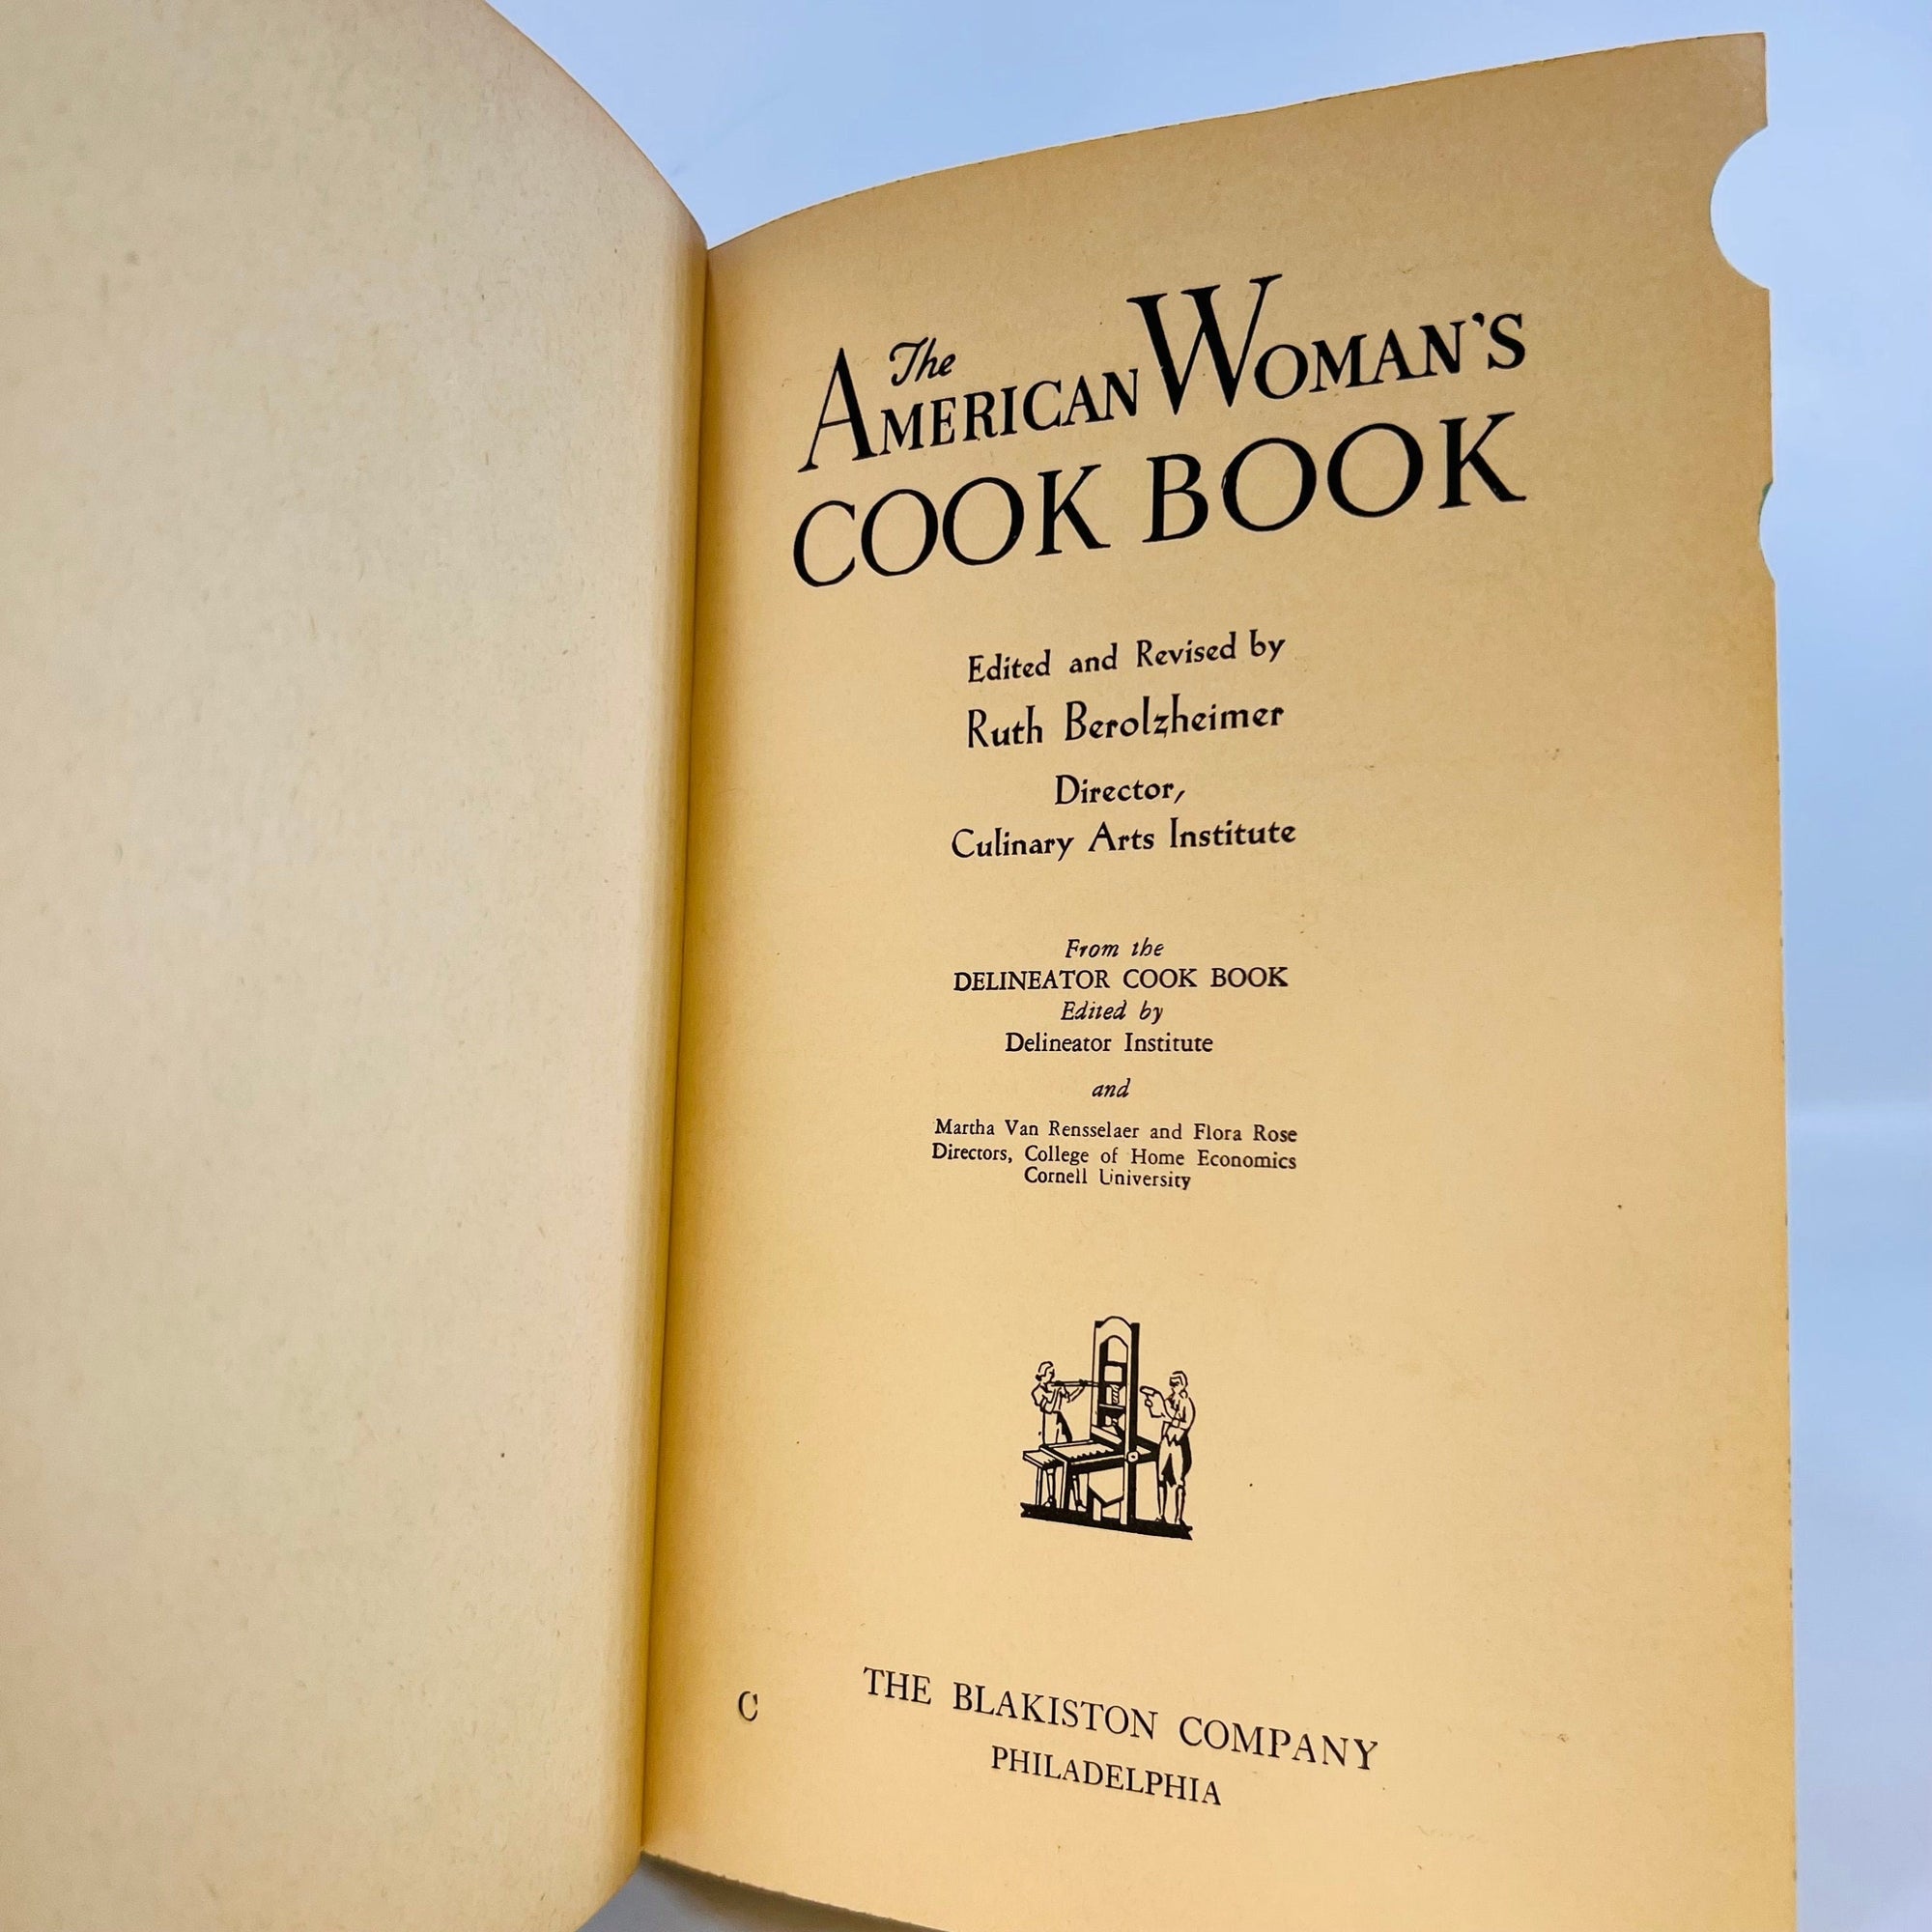 Woman's Home Companion Cook Book Edited by Ruth Berolzheimer 1944 The Blackiston Company Vintage Book